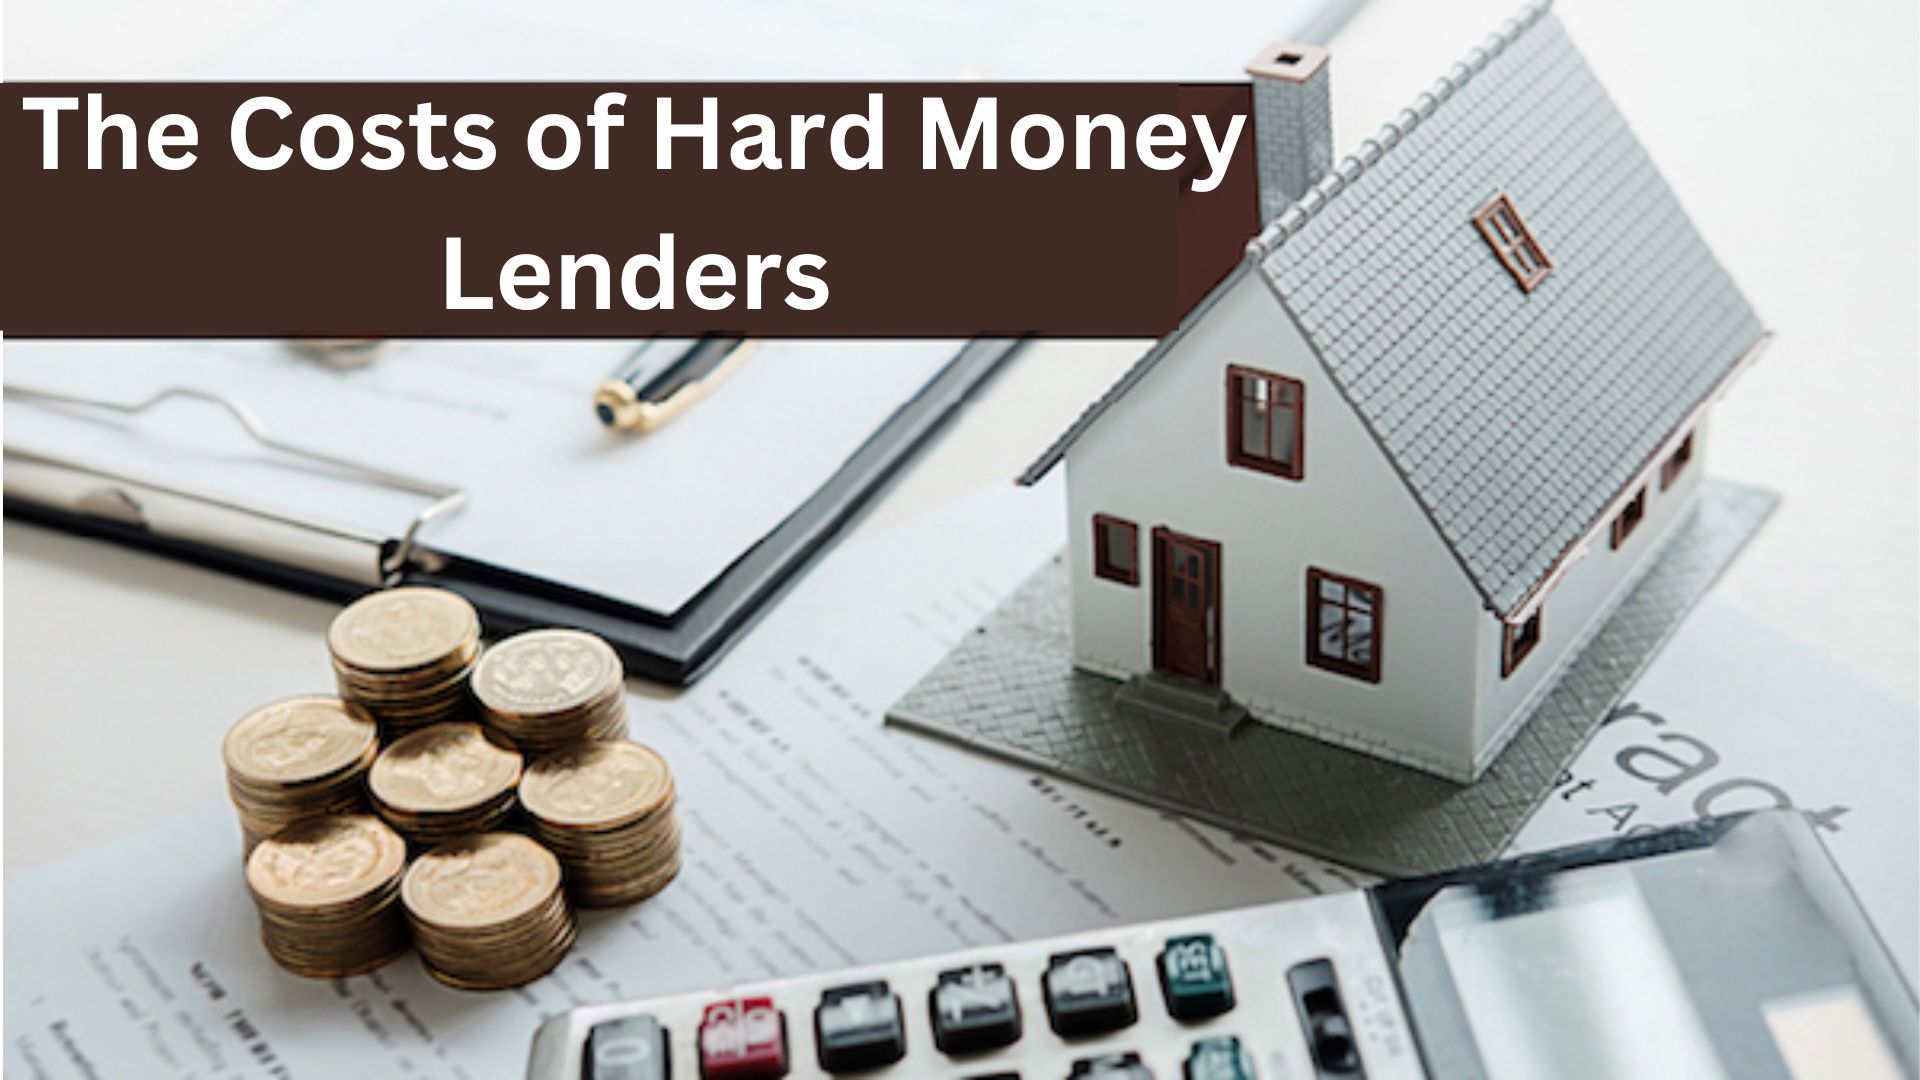 The Costs of Hard Money Lenders